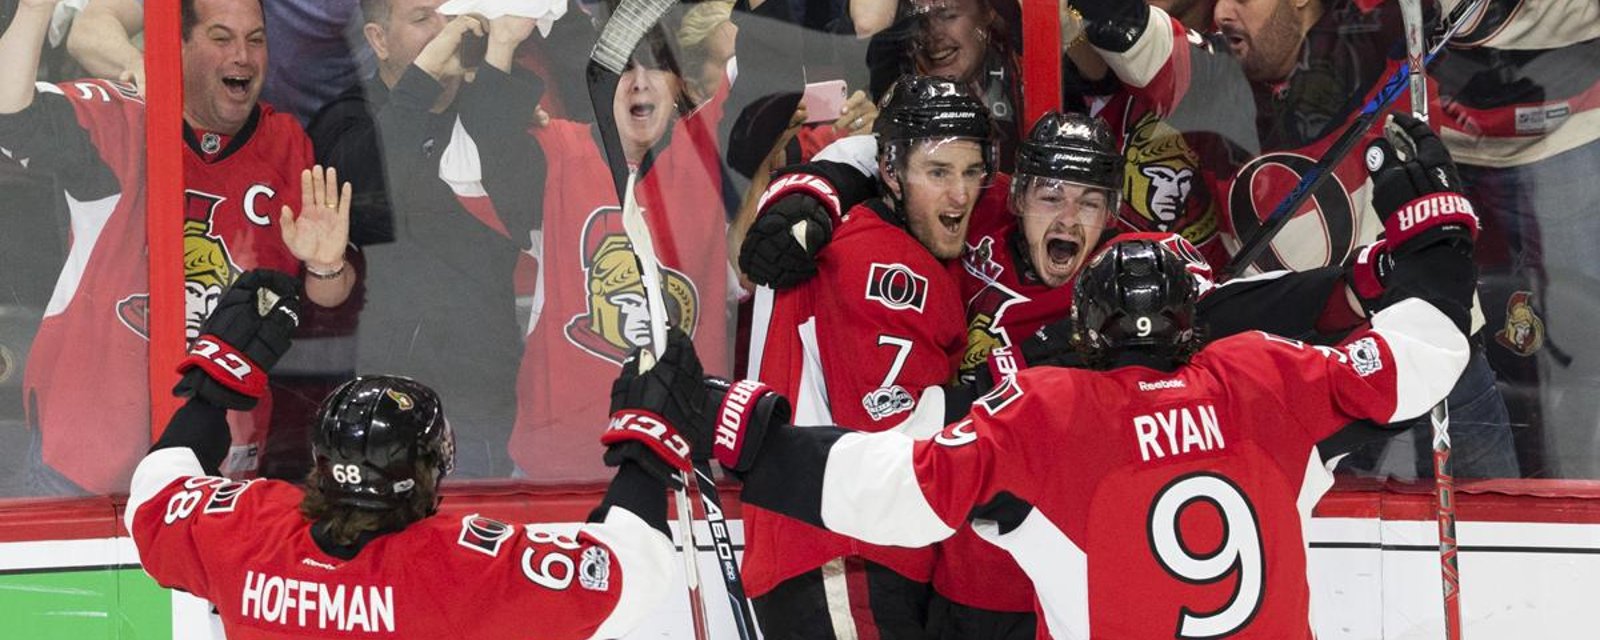 Jean-Gabriel Pageau adds one more hat to his amazing sequence! 